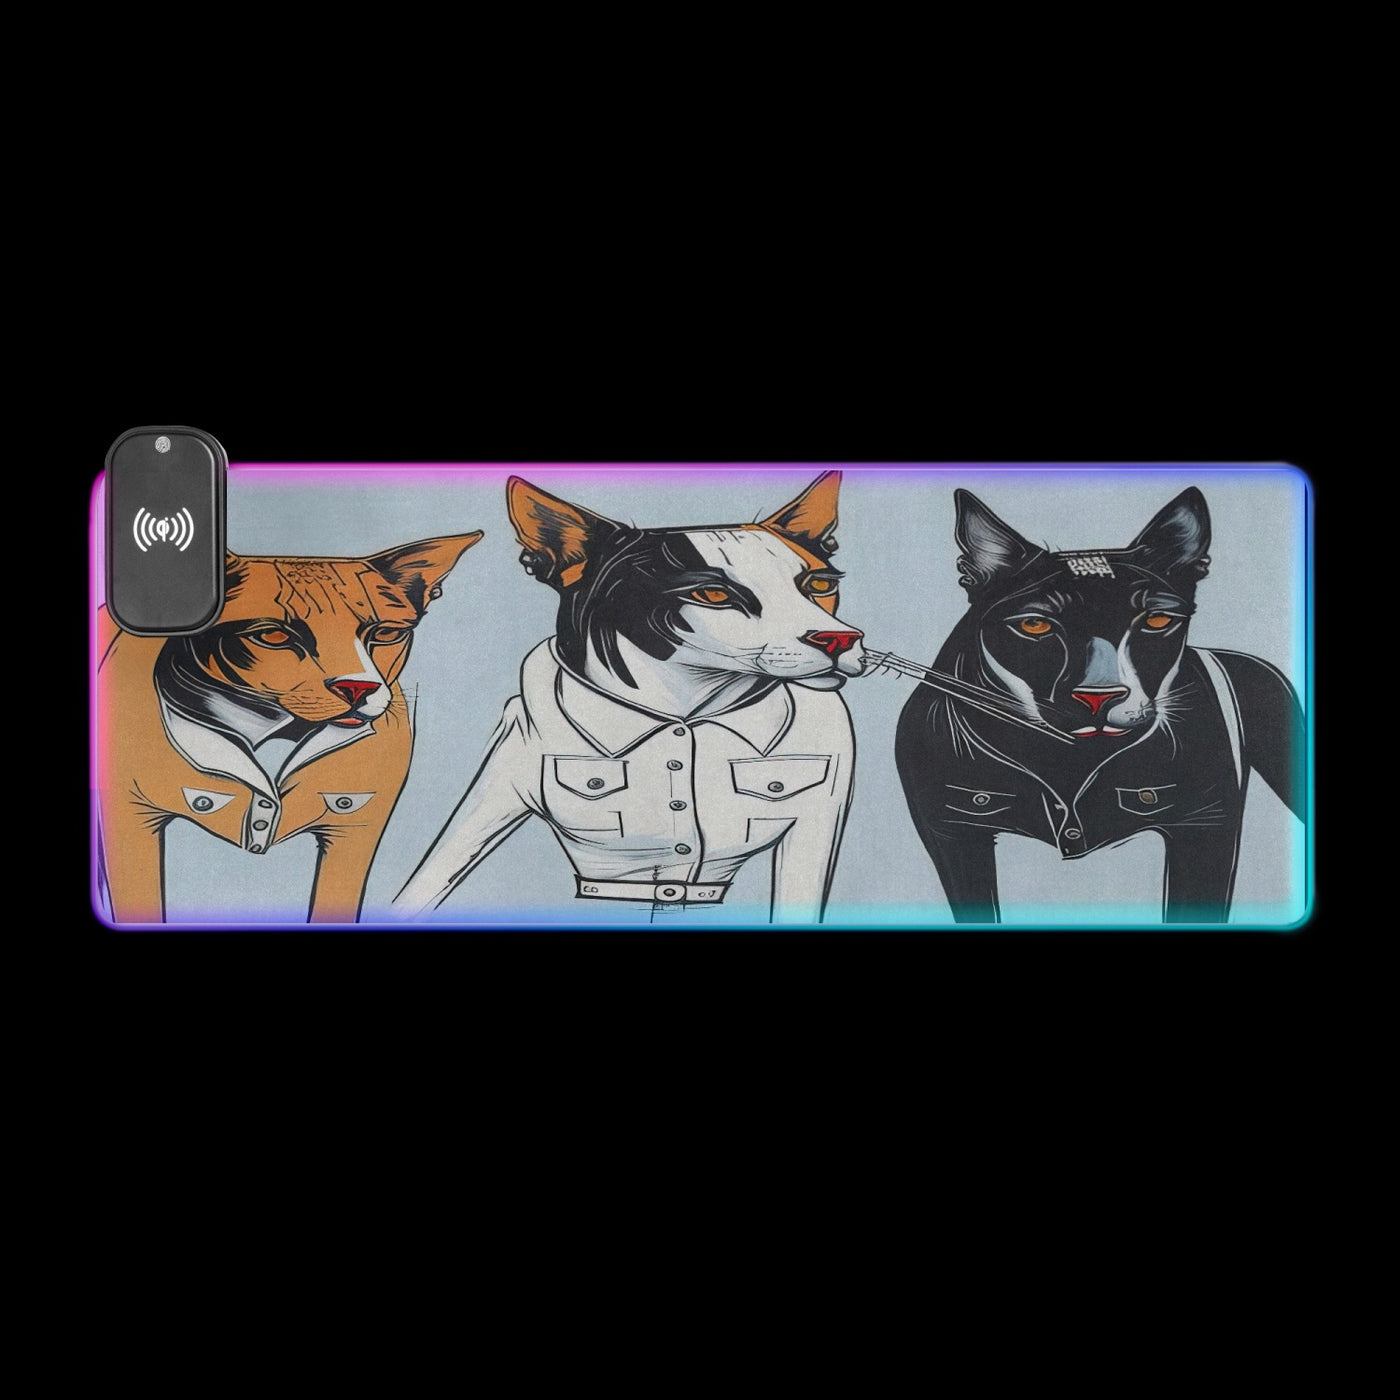 Dog Fashions Gaming Mouse Pad - Wireless Charging